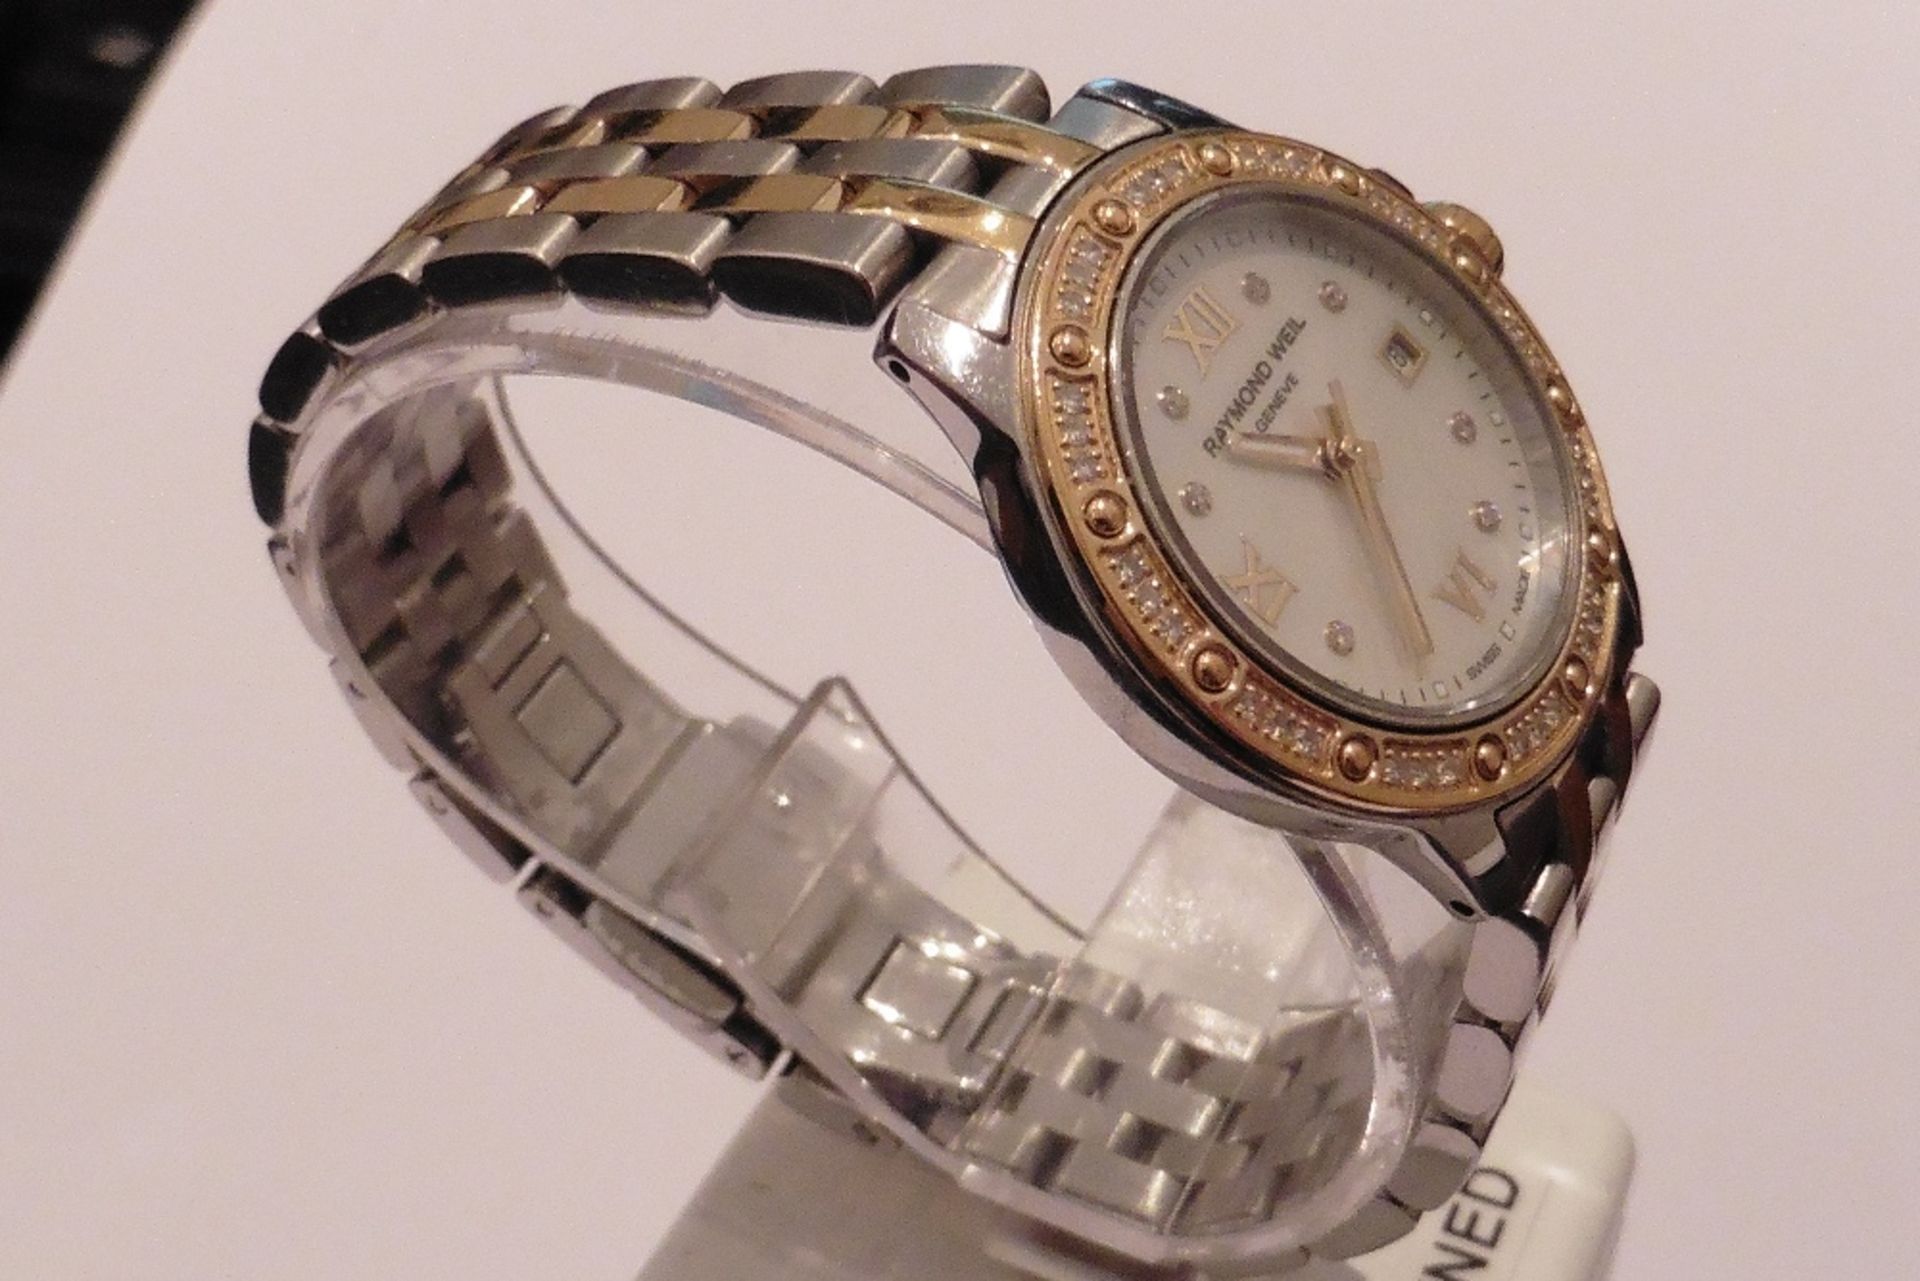 Pre-owned ladies Raymond Weil watch, model number 5399.  Stainless steel with gold plating. Has brac - Image 2 of 3